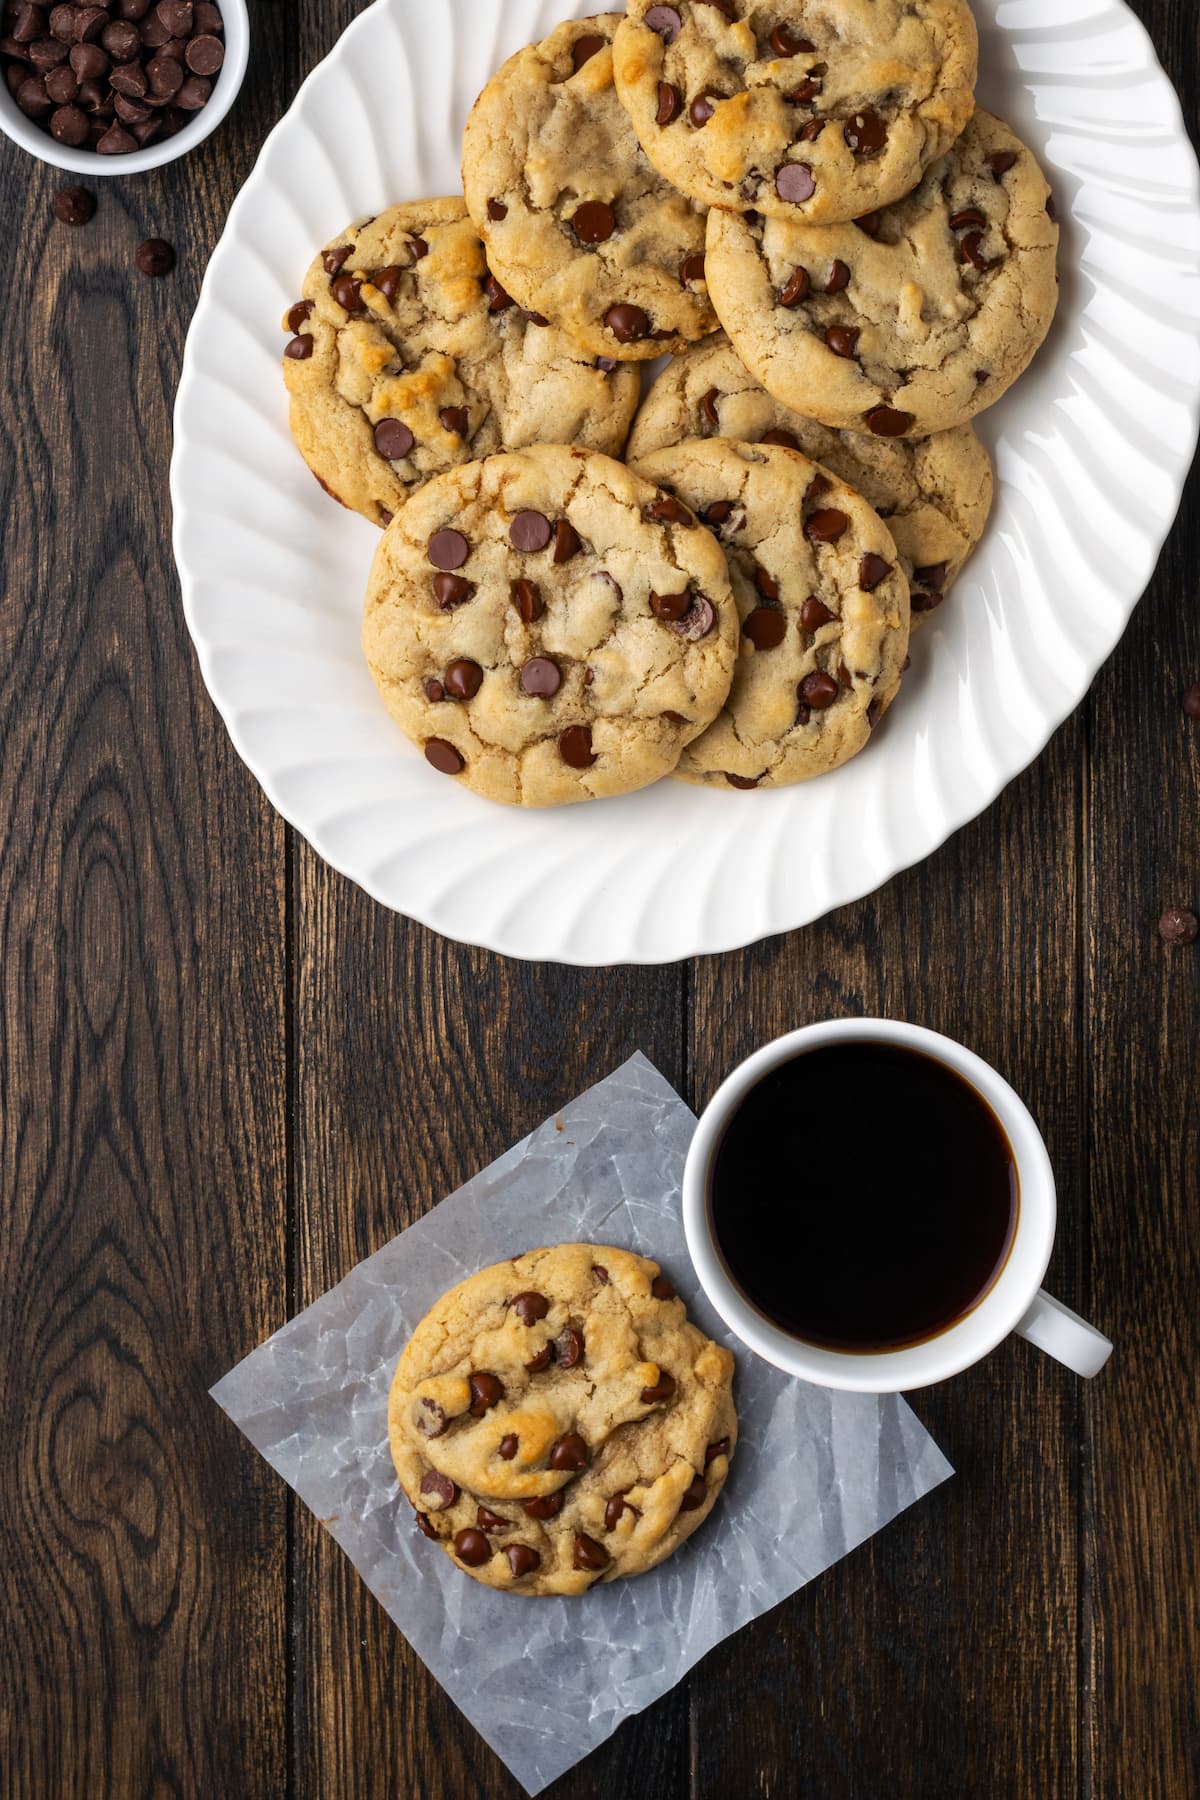 Overhead view of a chocolate chip Subway cookie on a piece of parchment paper next to a cup of coffee and more cookies on a white plate.